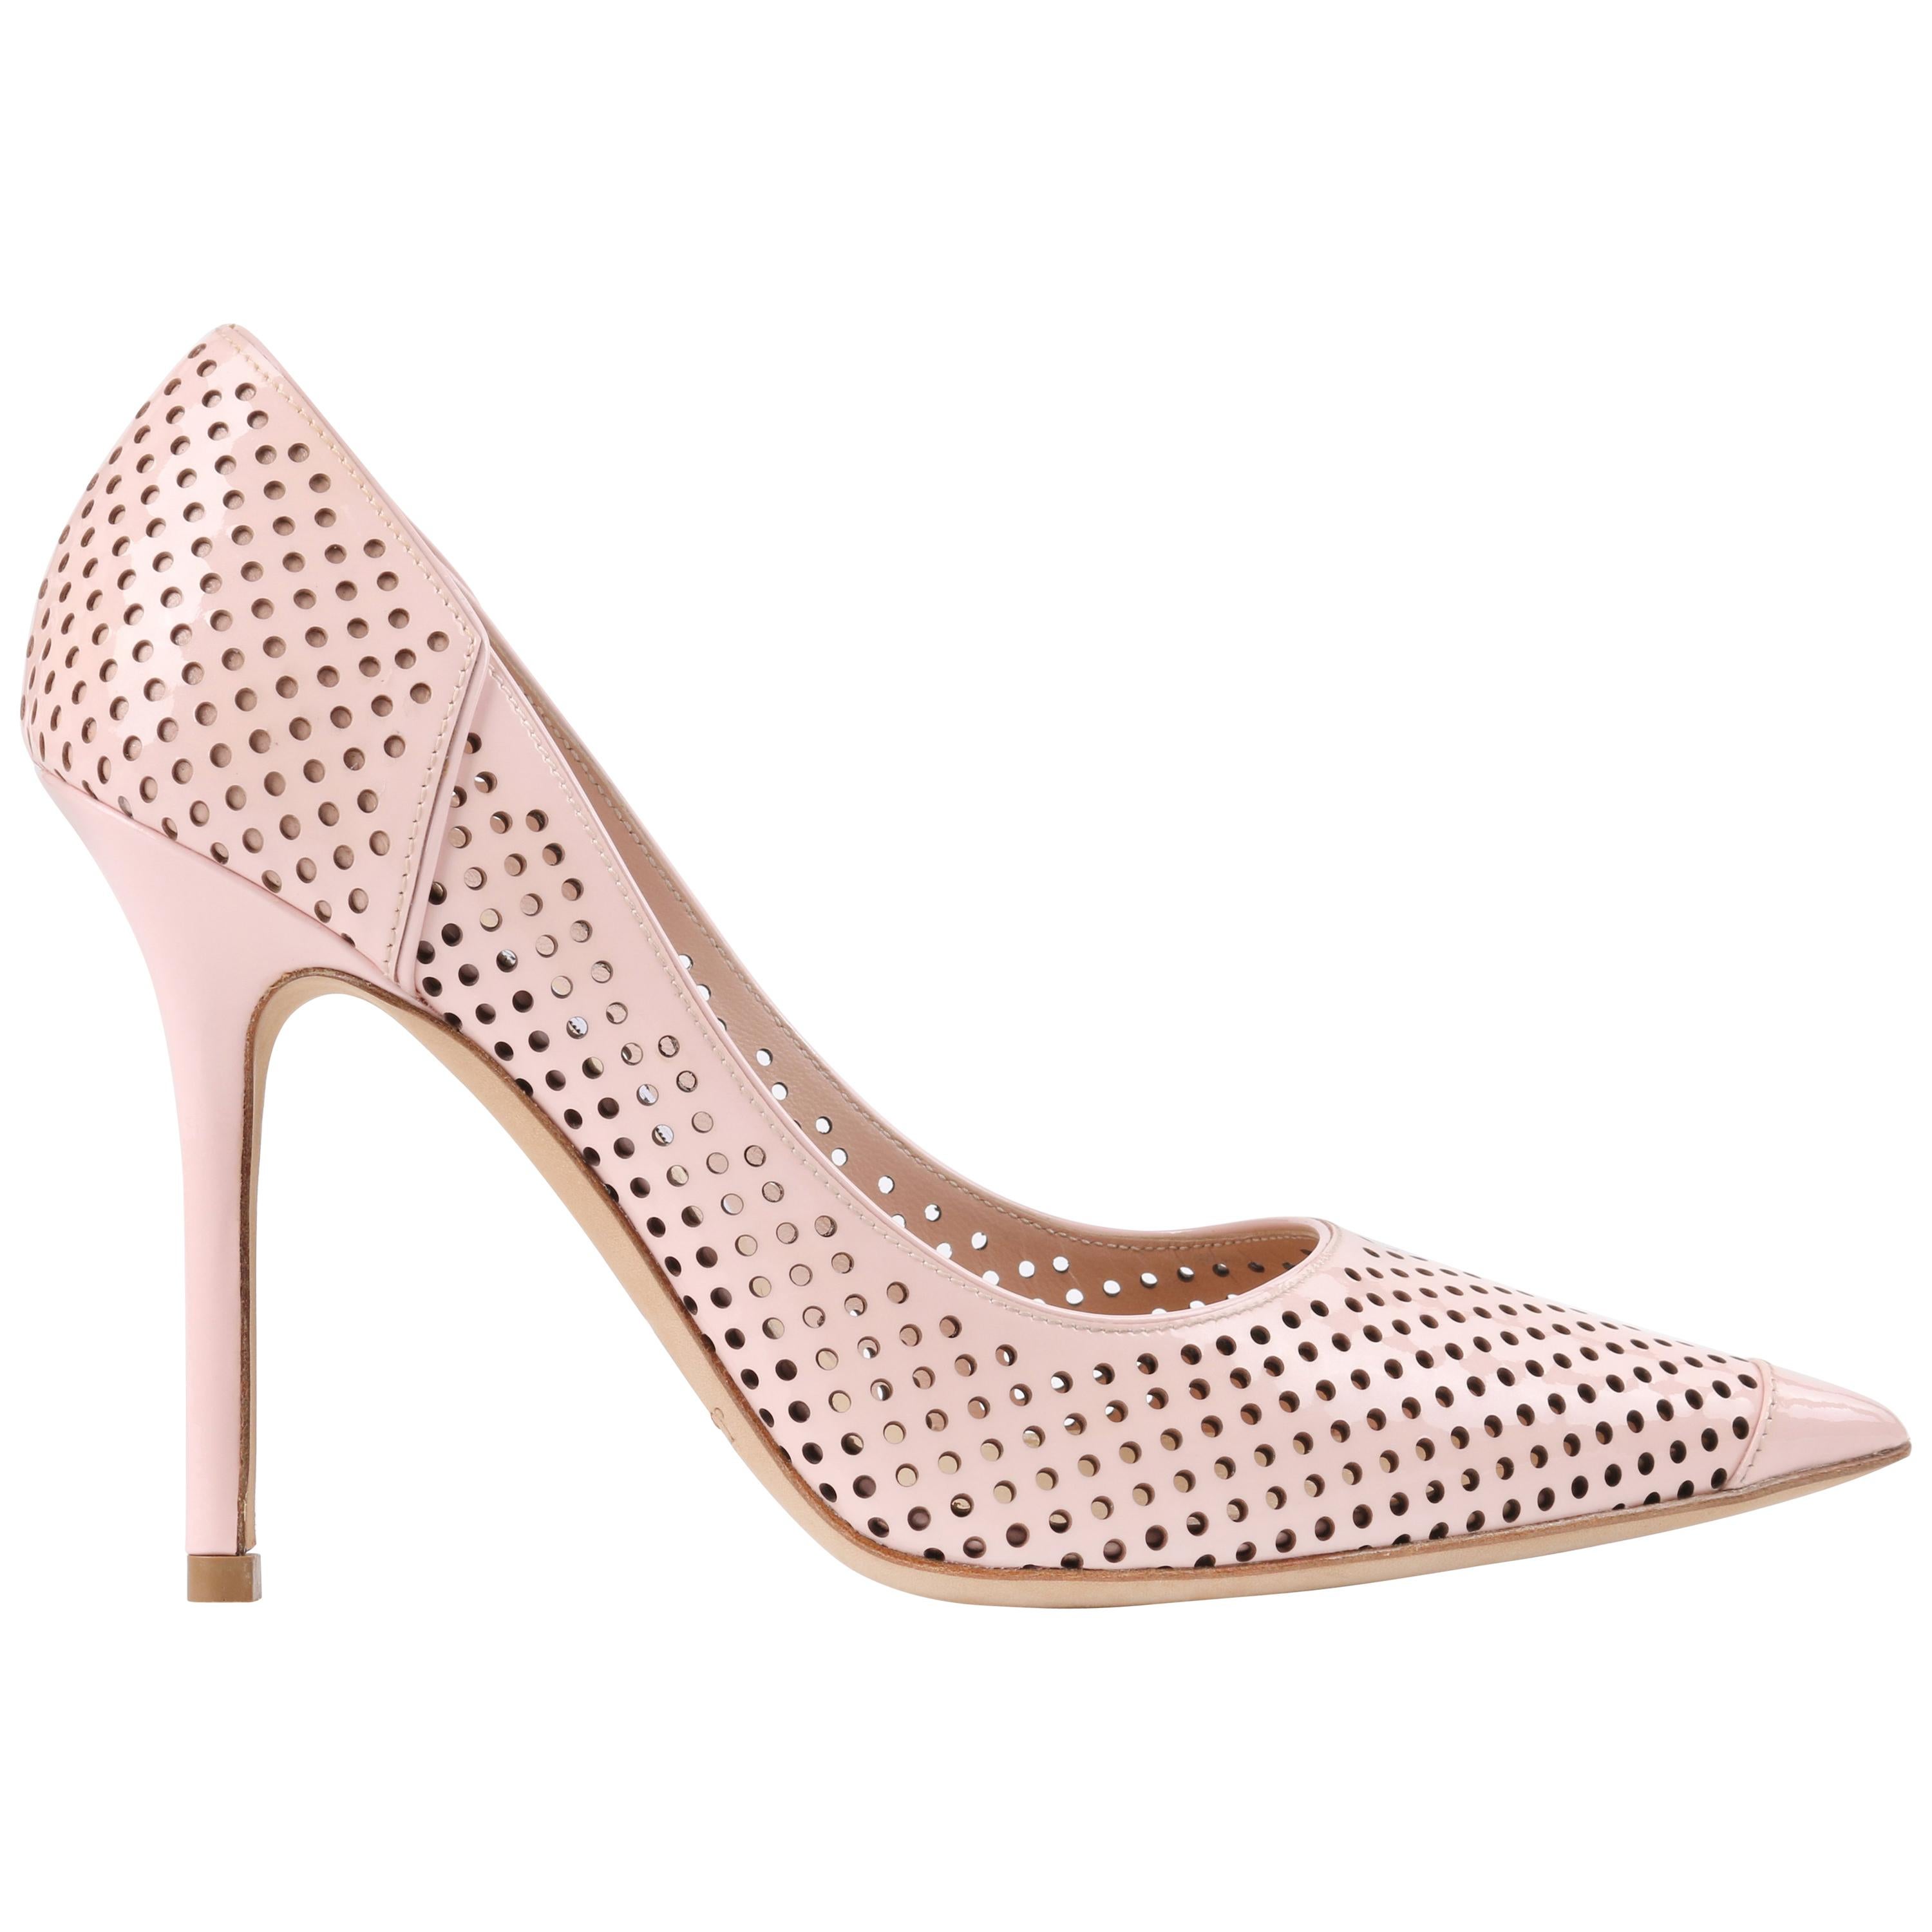 JIMMY CHOO "Abel" Blush Pink Perforated Patent Leather Pointed Toe Pumps